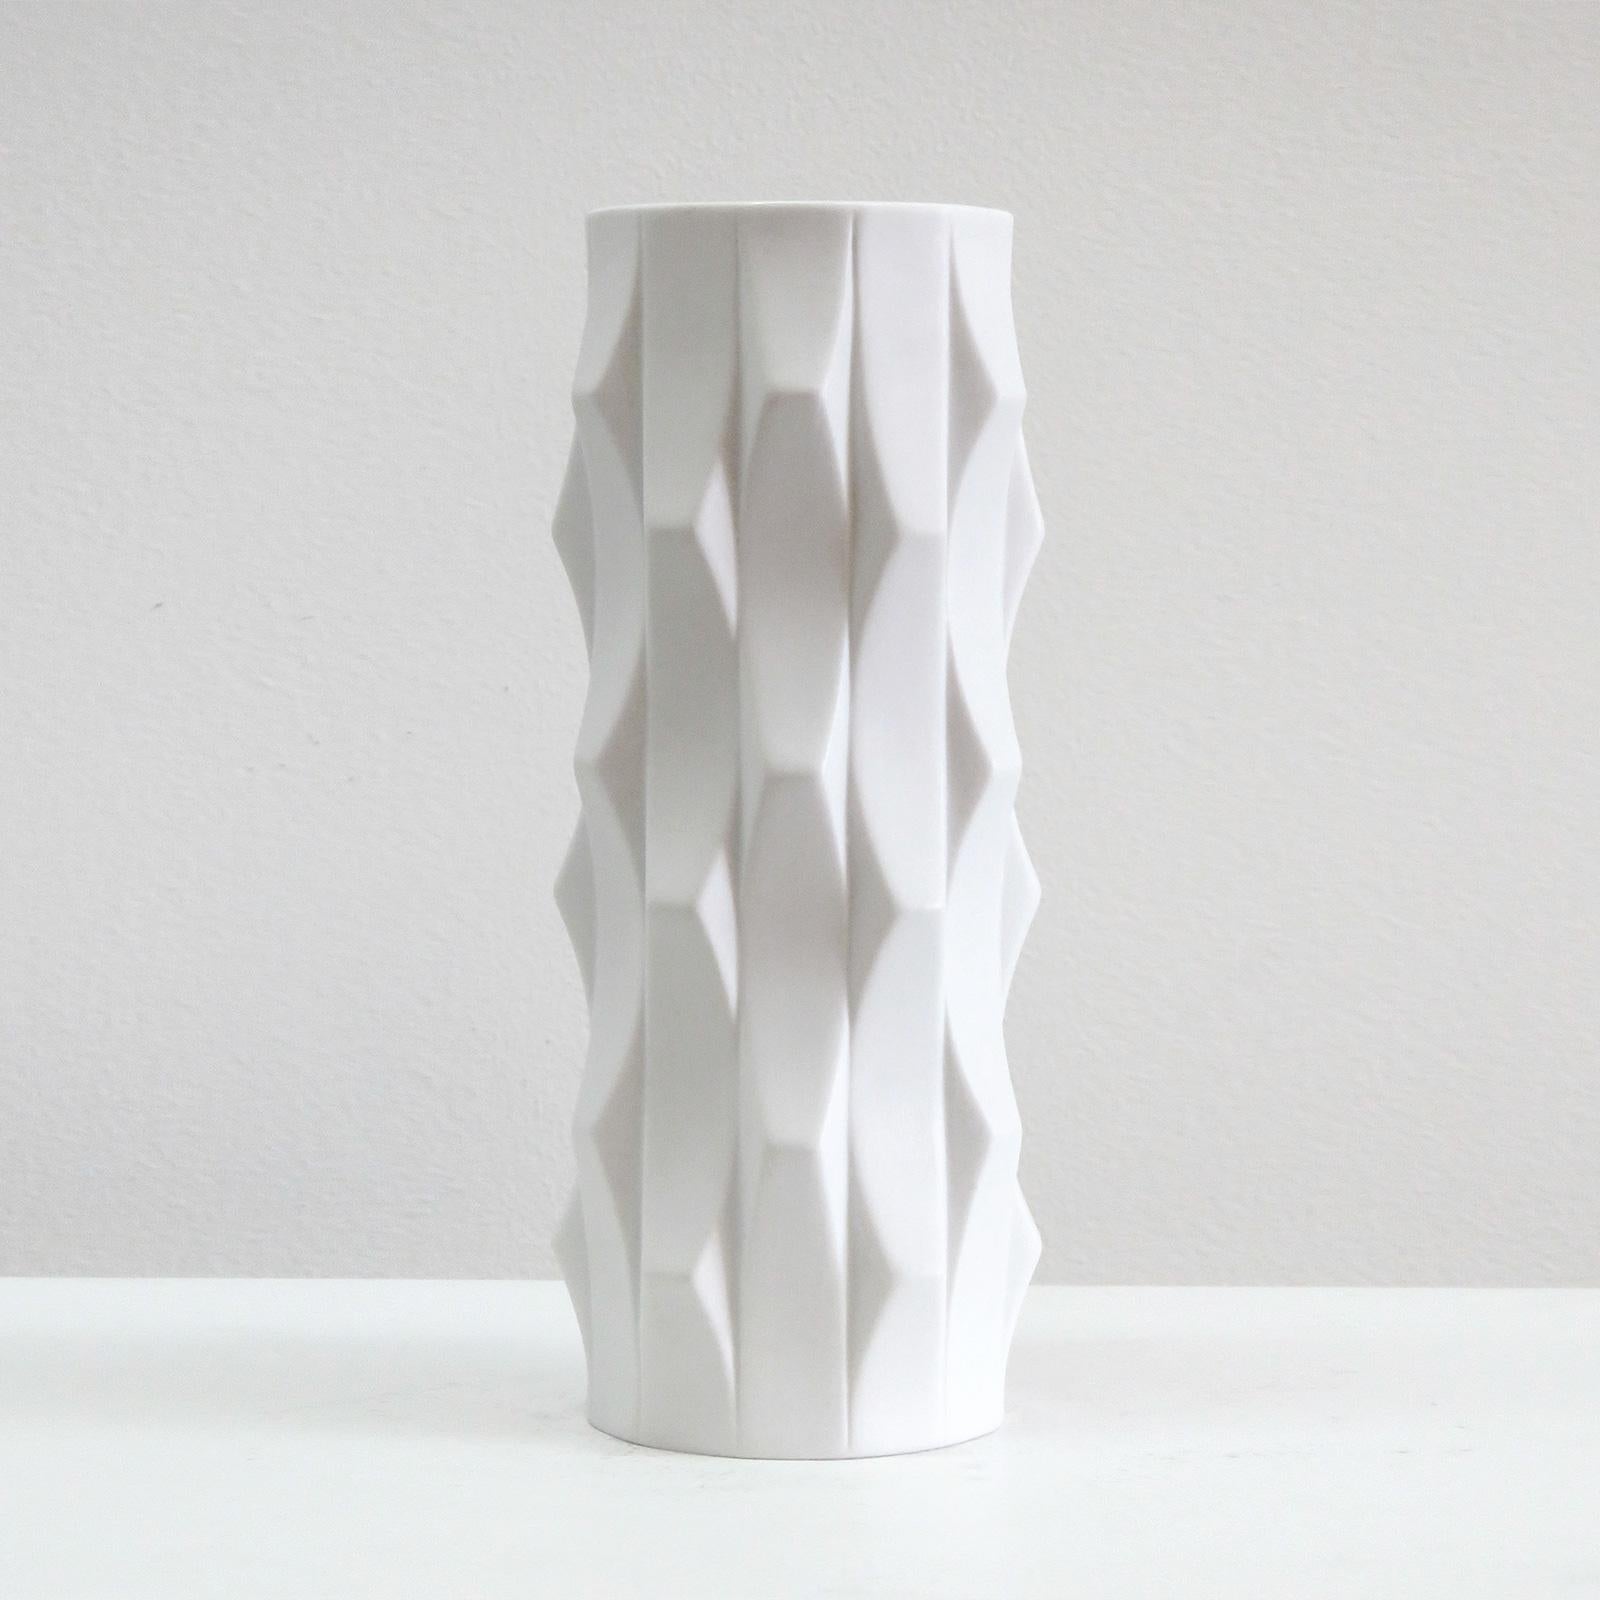 sculptural porcelain vase by Heinrich Fuchs for Hutschenreuther, released between 1968 and 1970, large version model 5090/29, matte exterior, gloss interior, marked.